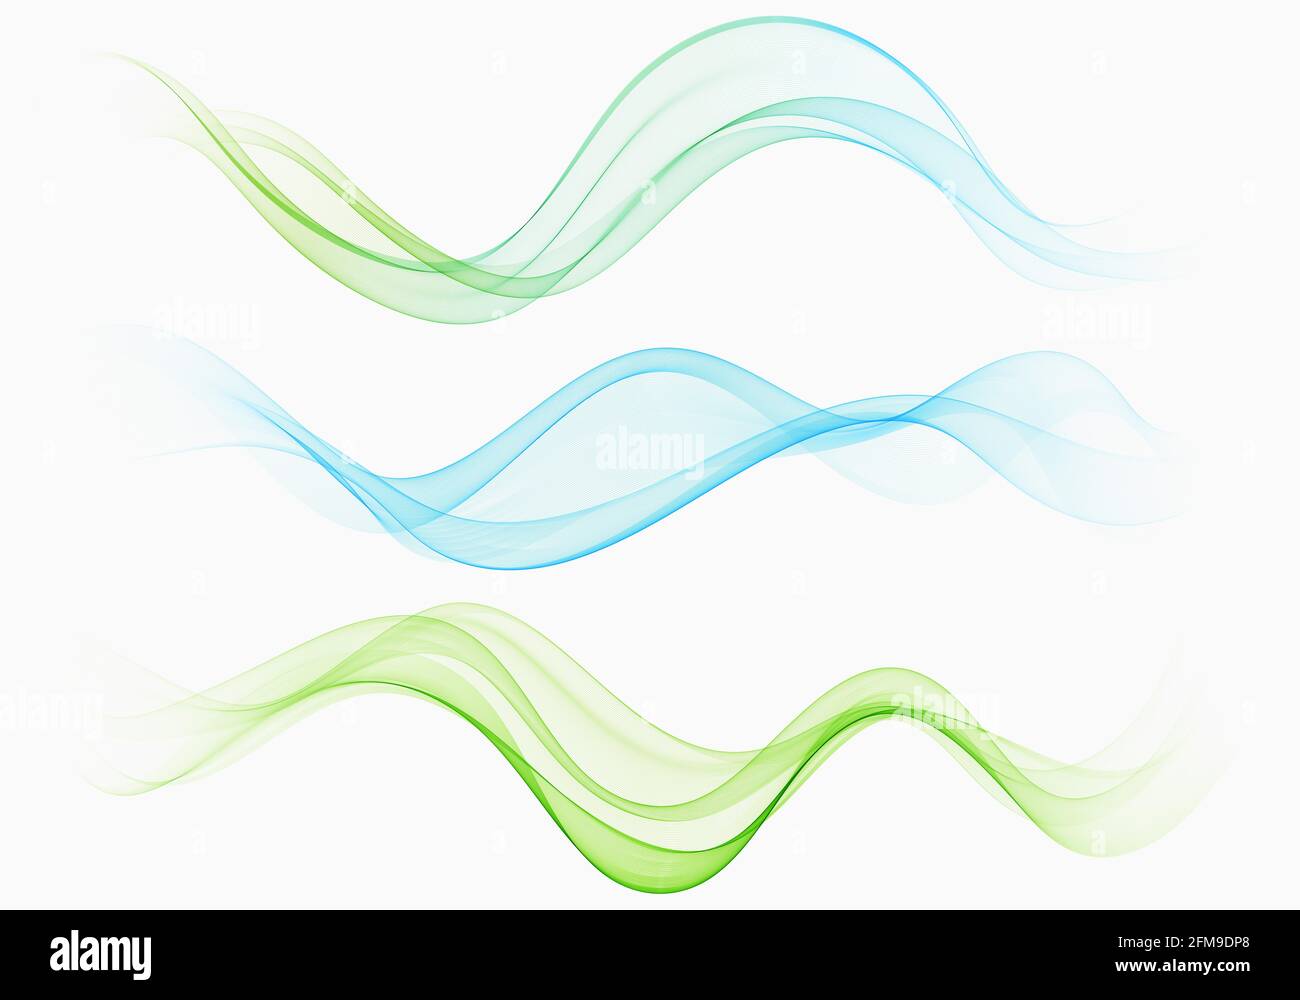 Bright green blue speed abstract lines flow Stock Vector